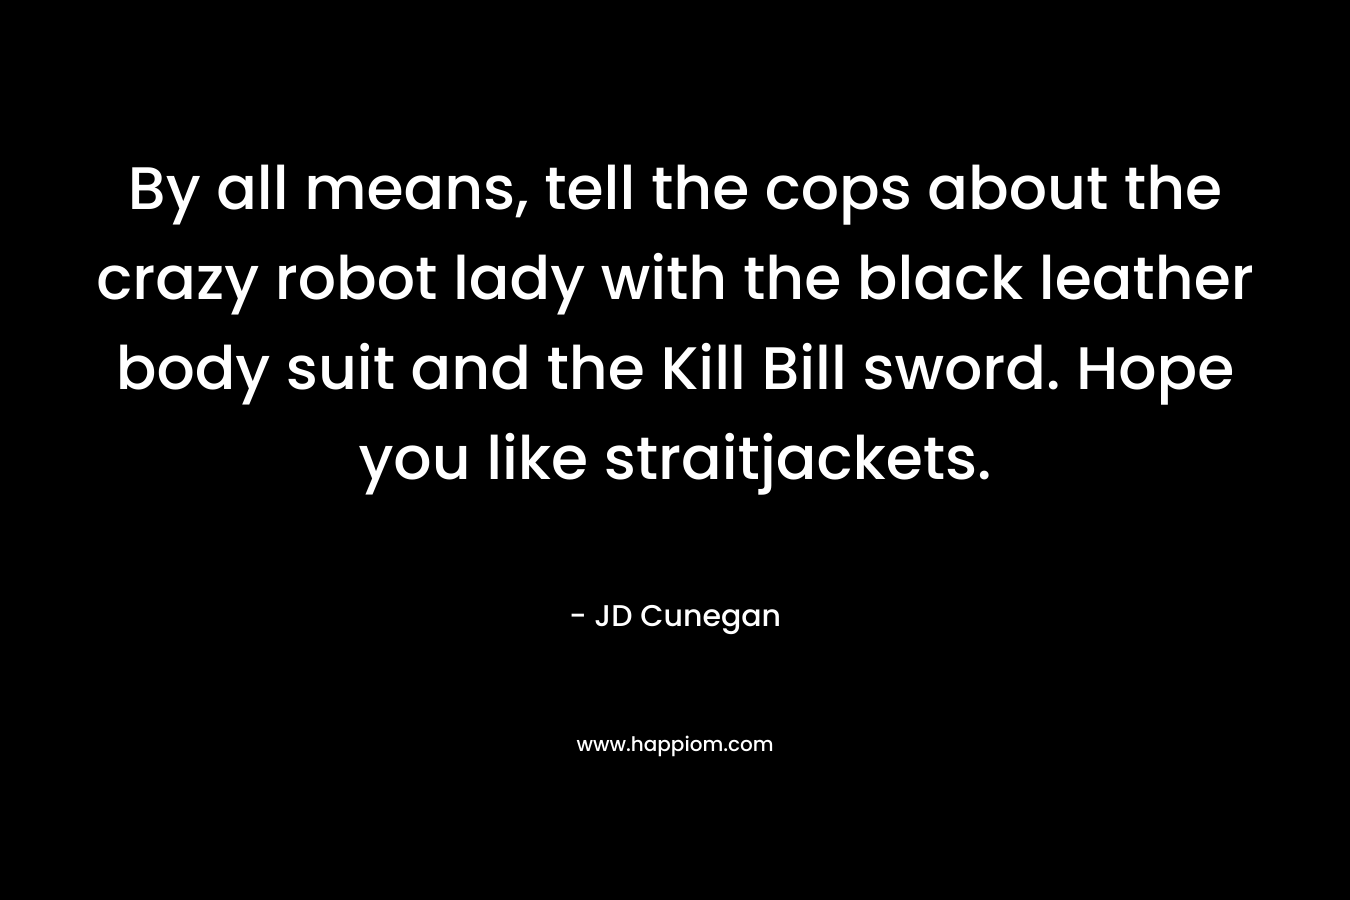 By all means, tell the cops about the crazy robot lady with the black leather body suit and the Kill Bill sword. Hope you like straitjackets. – JD Cunegan